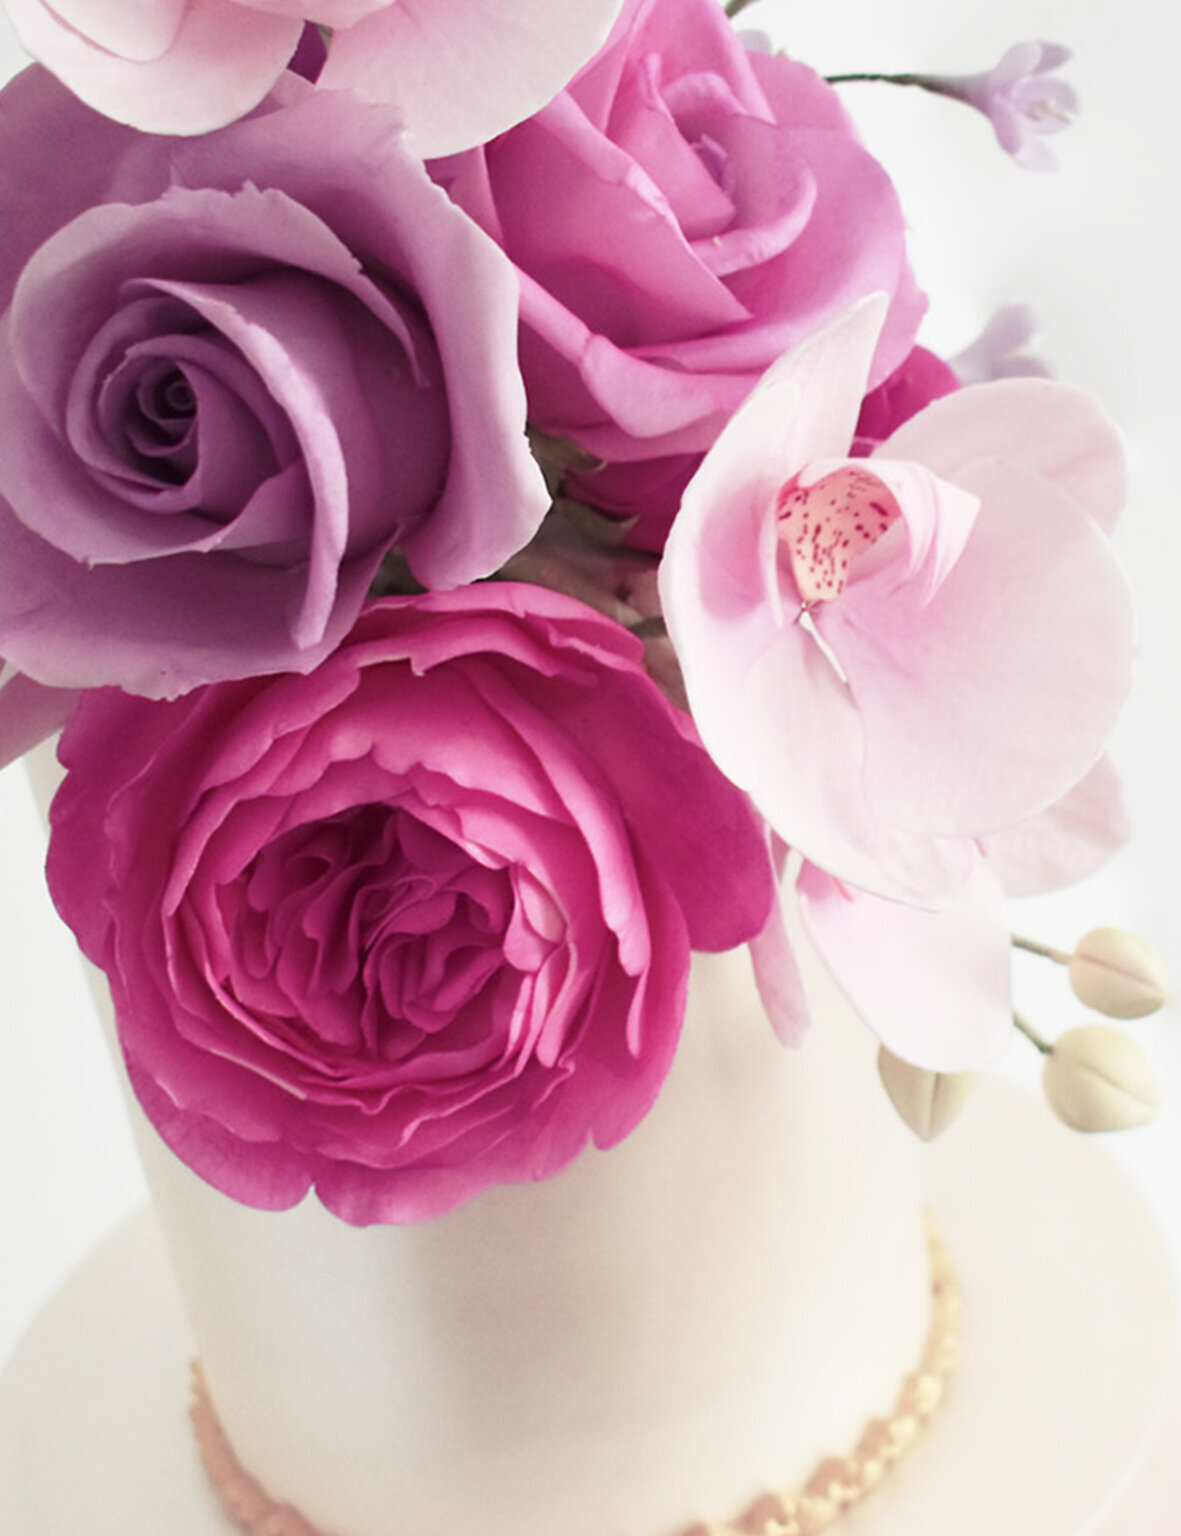 Vibrant pink and lilac sugar flowers on a wedding cake